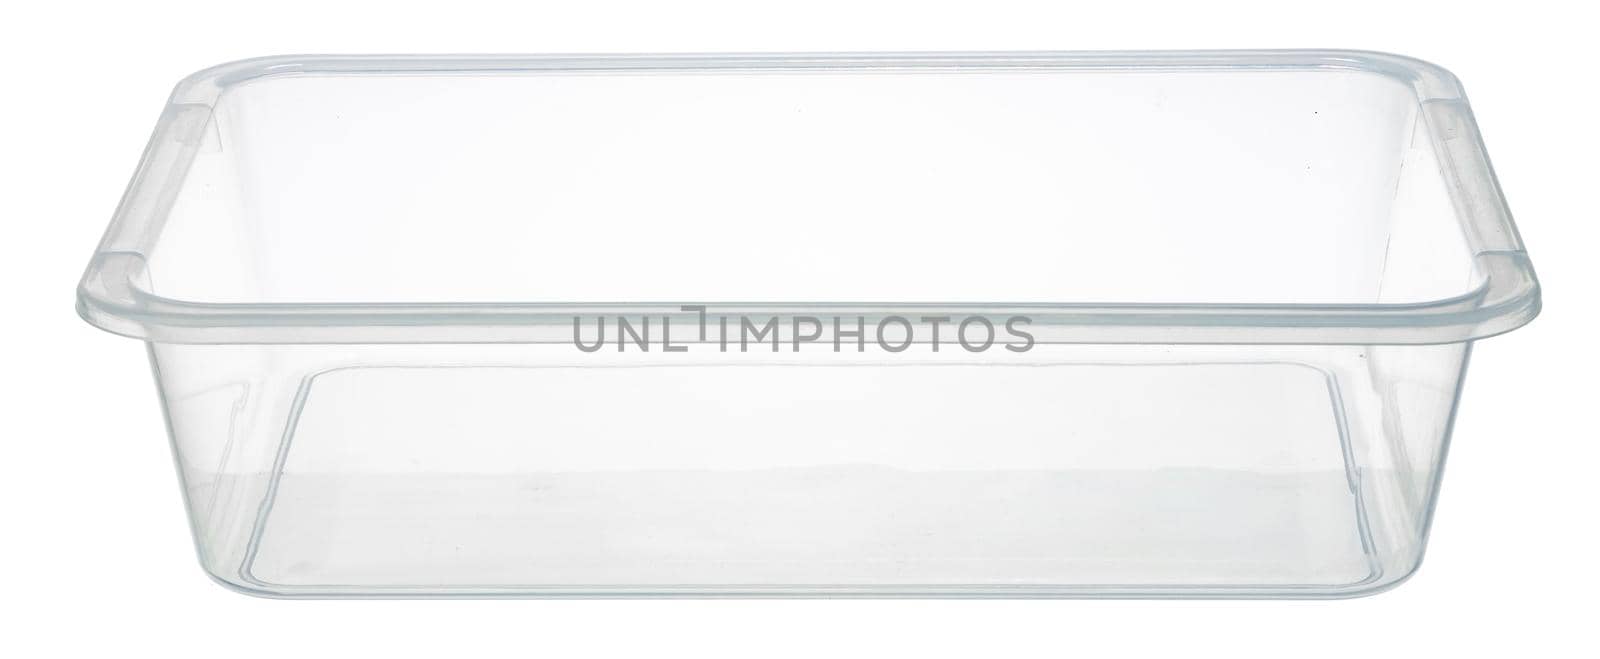 Clear plastic transparent tray isolated on white background